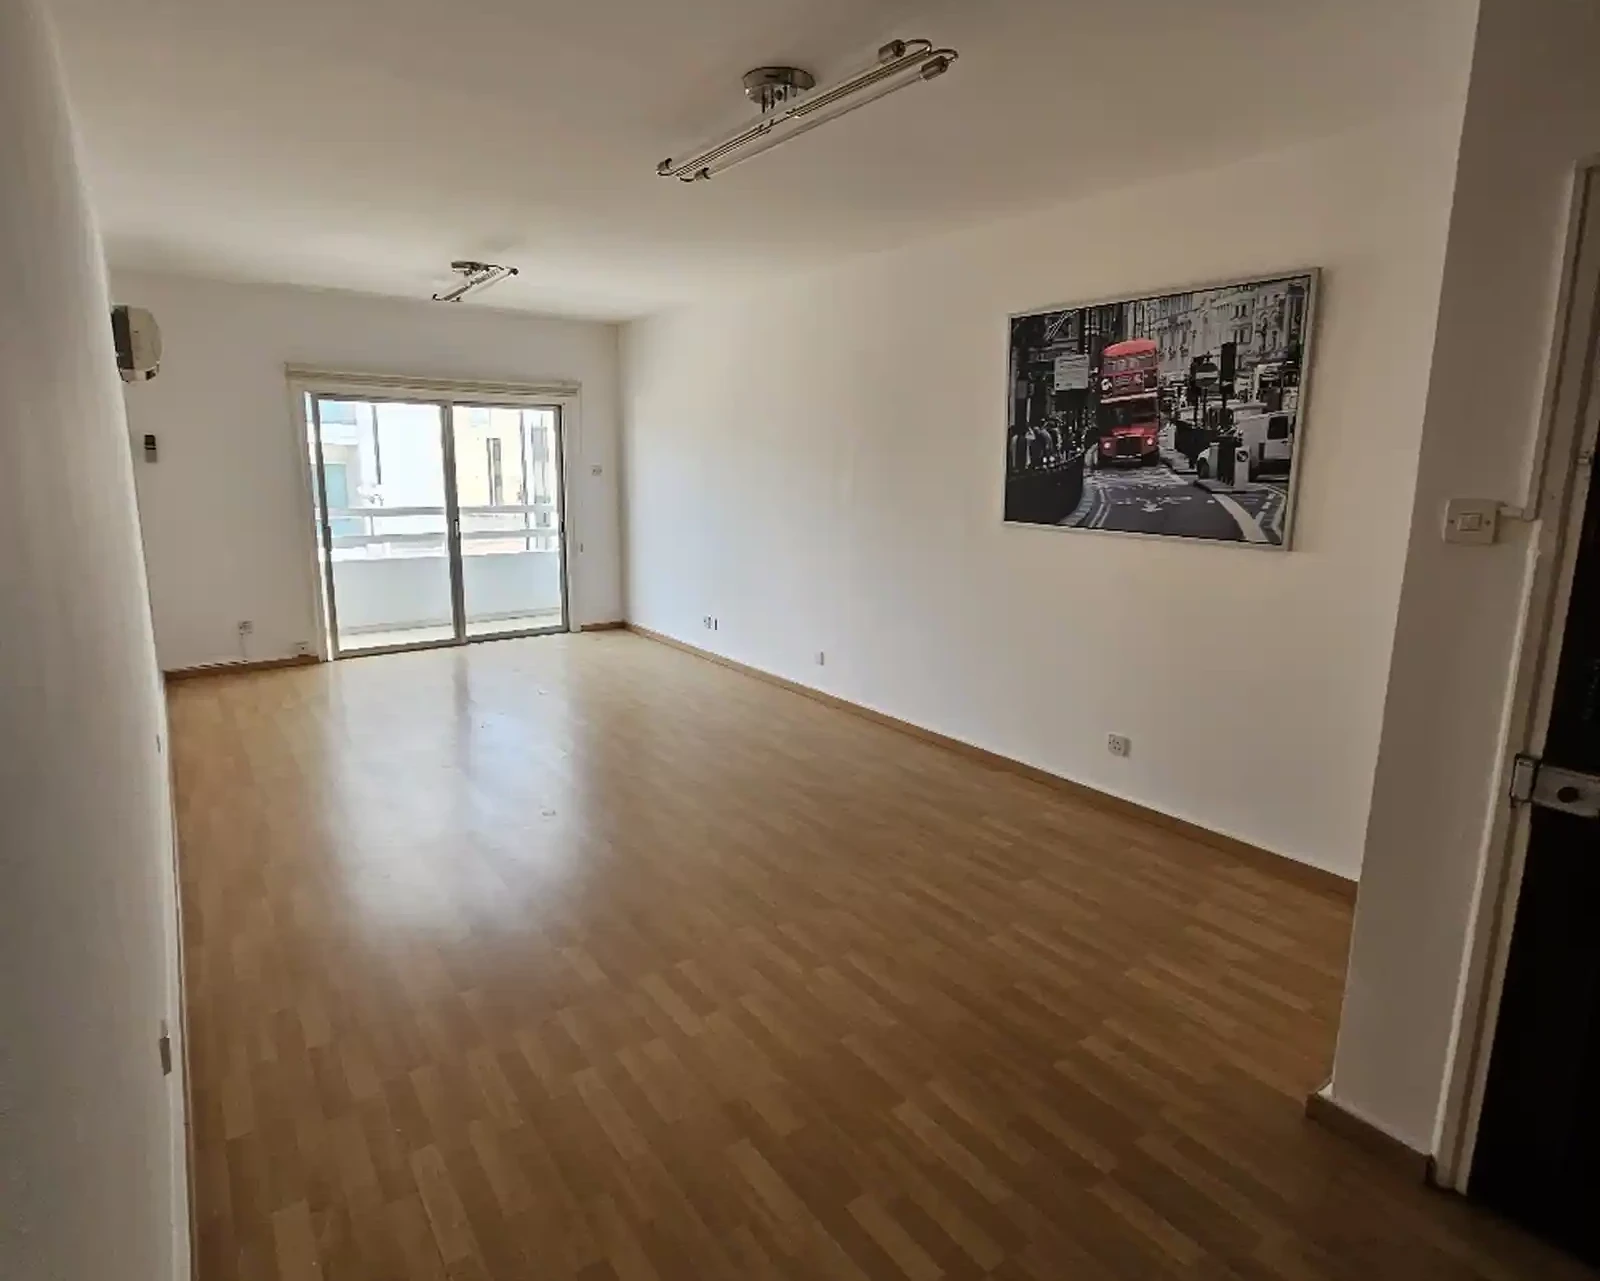 3-bedroom apartment fоr sаle €137.000, image 1